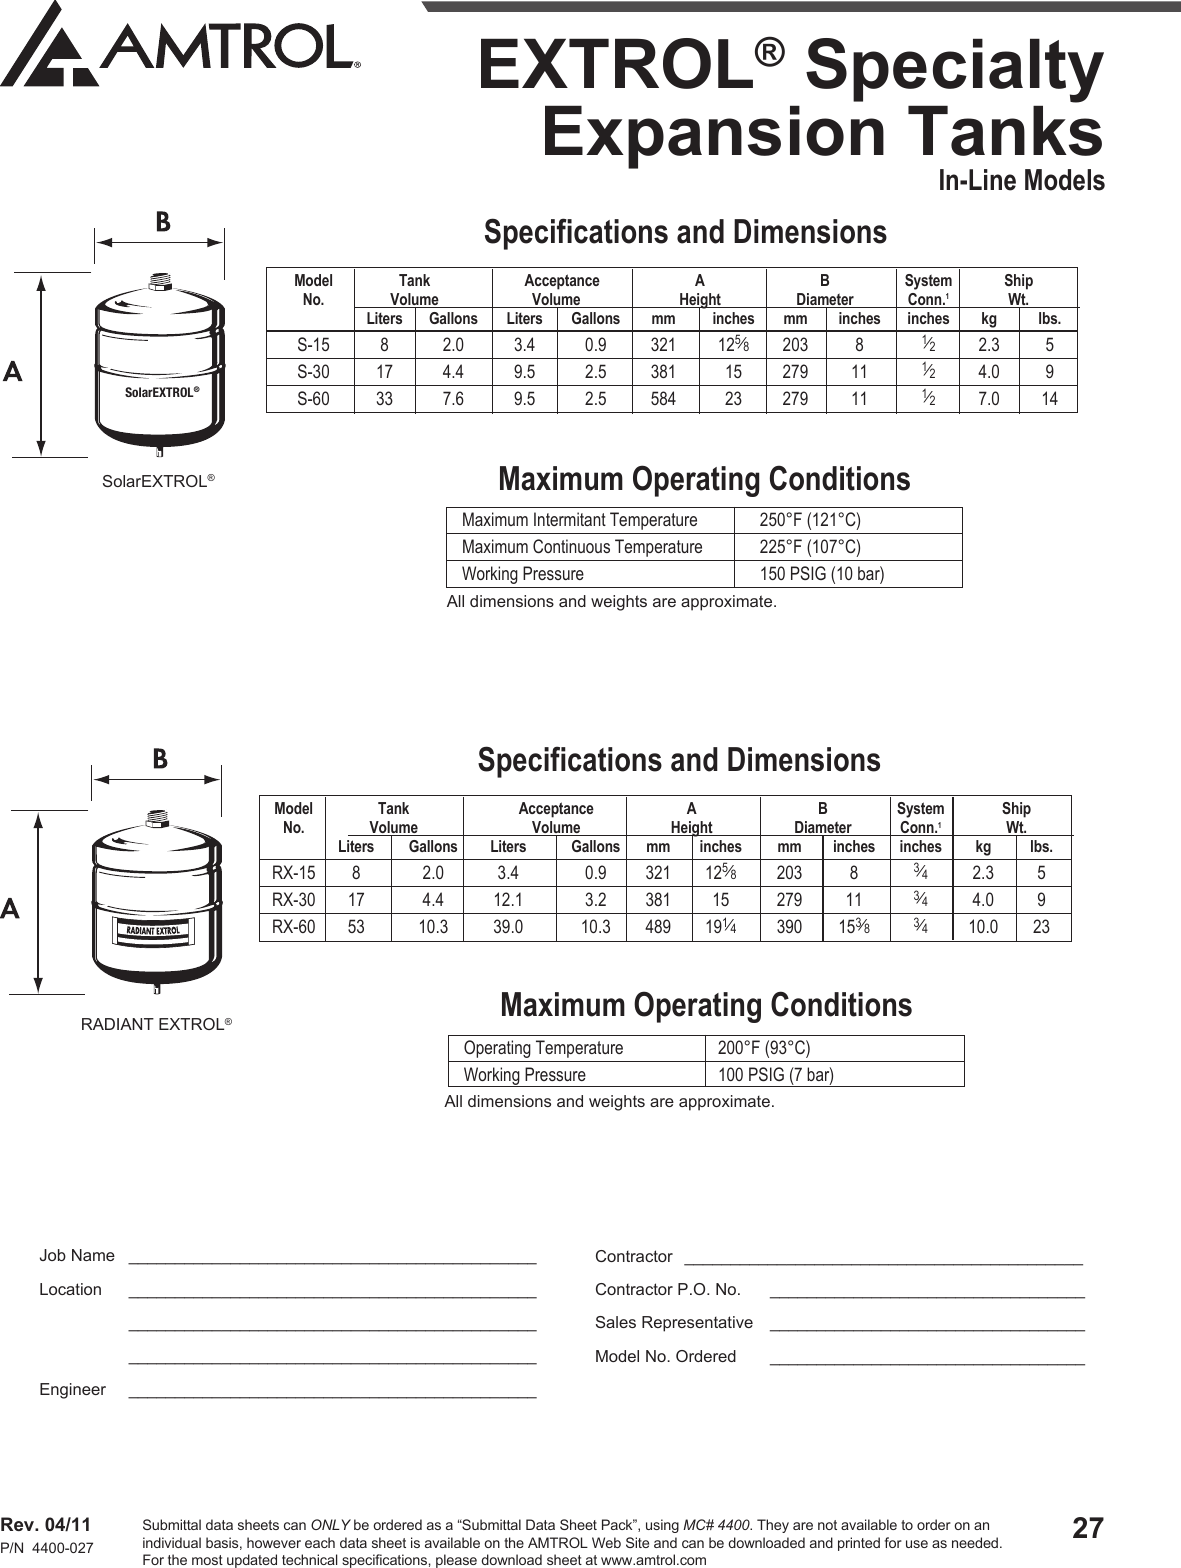 Page 2 of 2 - 551519 3 Amtrol FT-109 Fill-Trol Expansion Tank Specifications